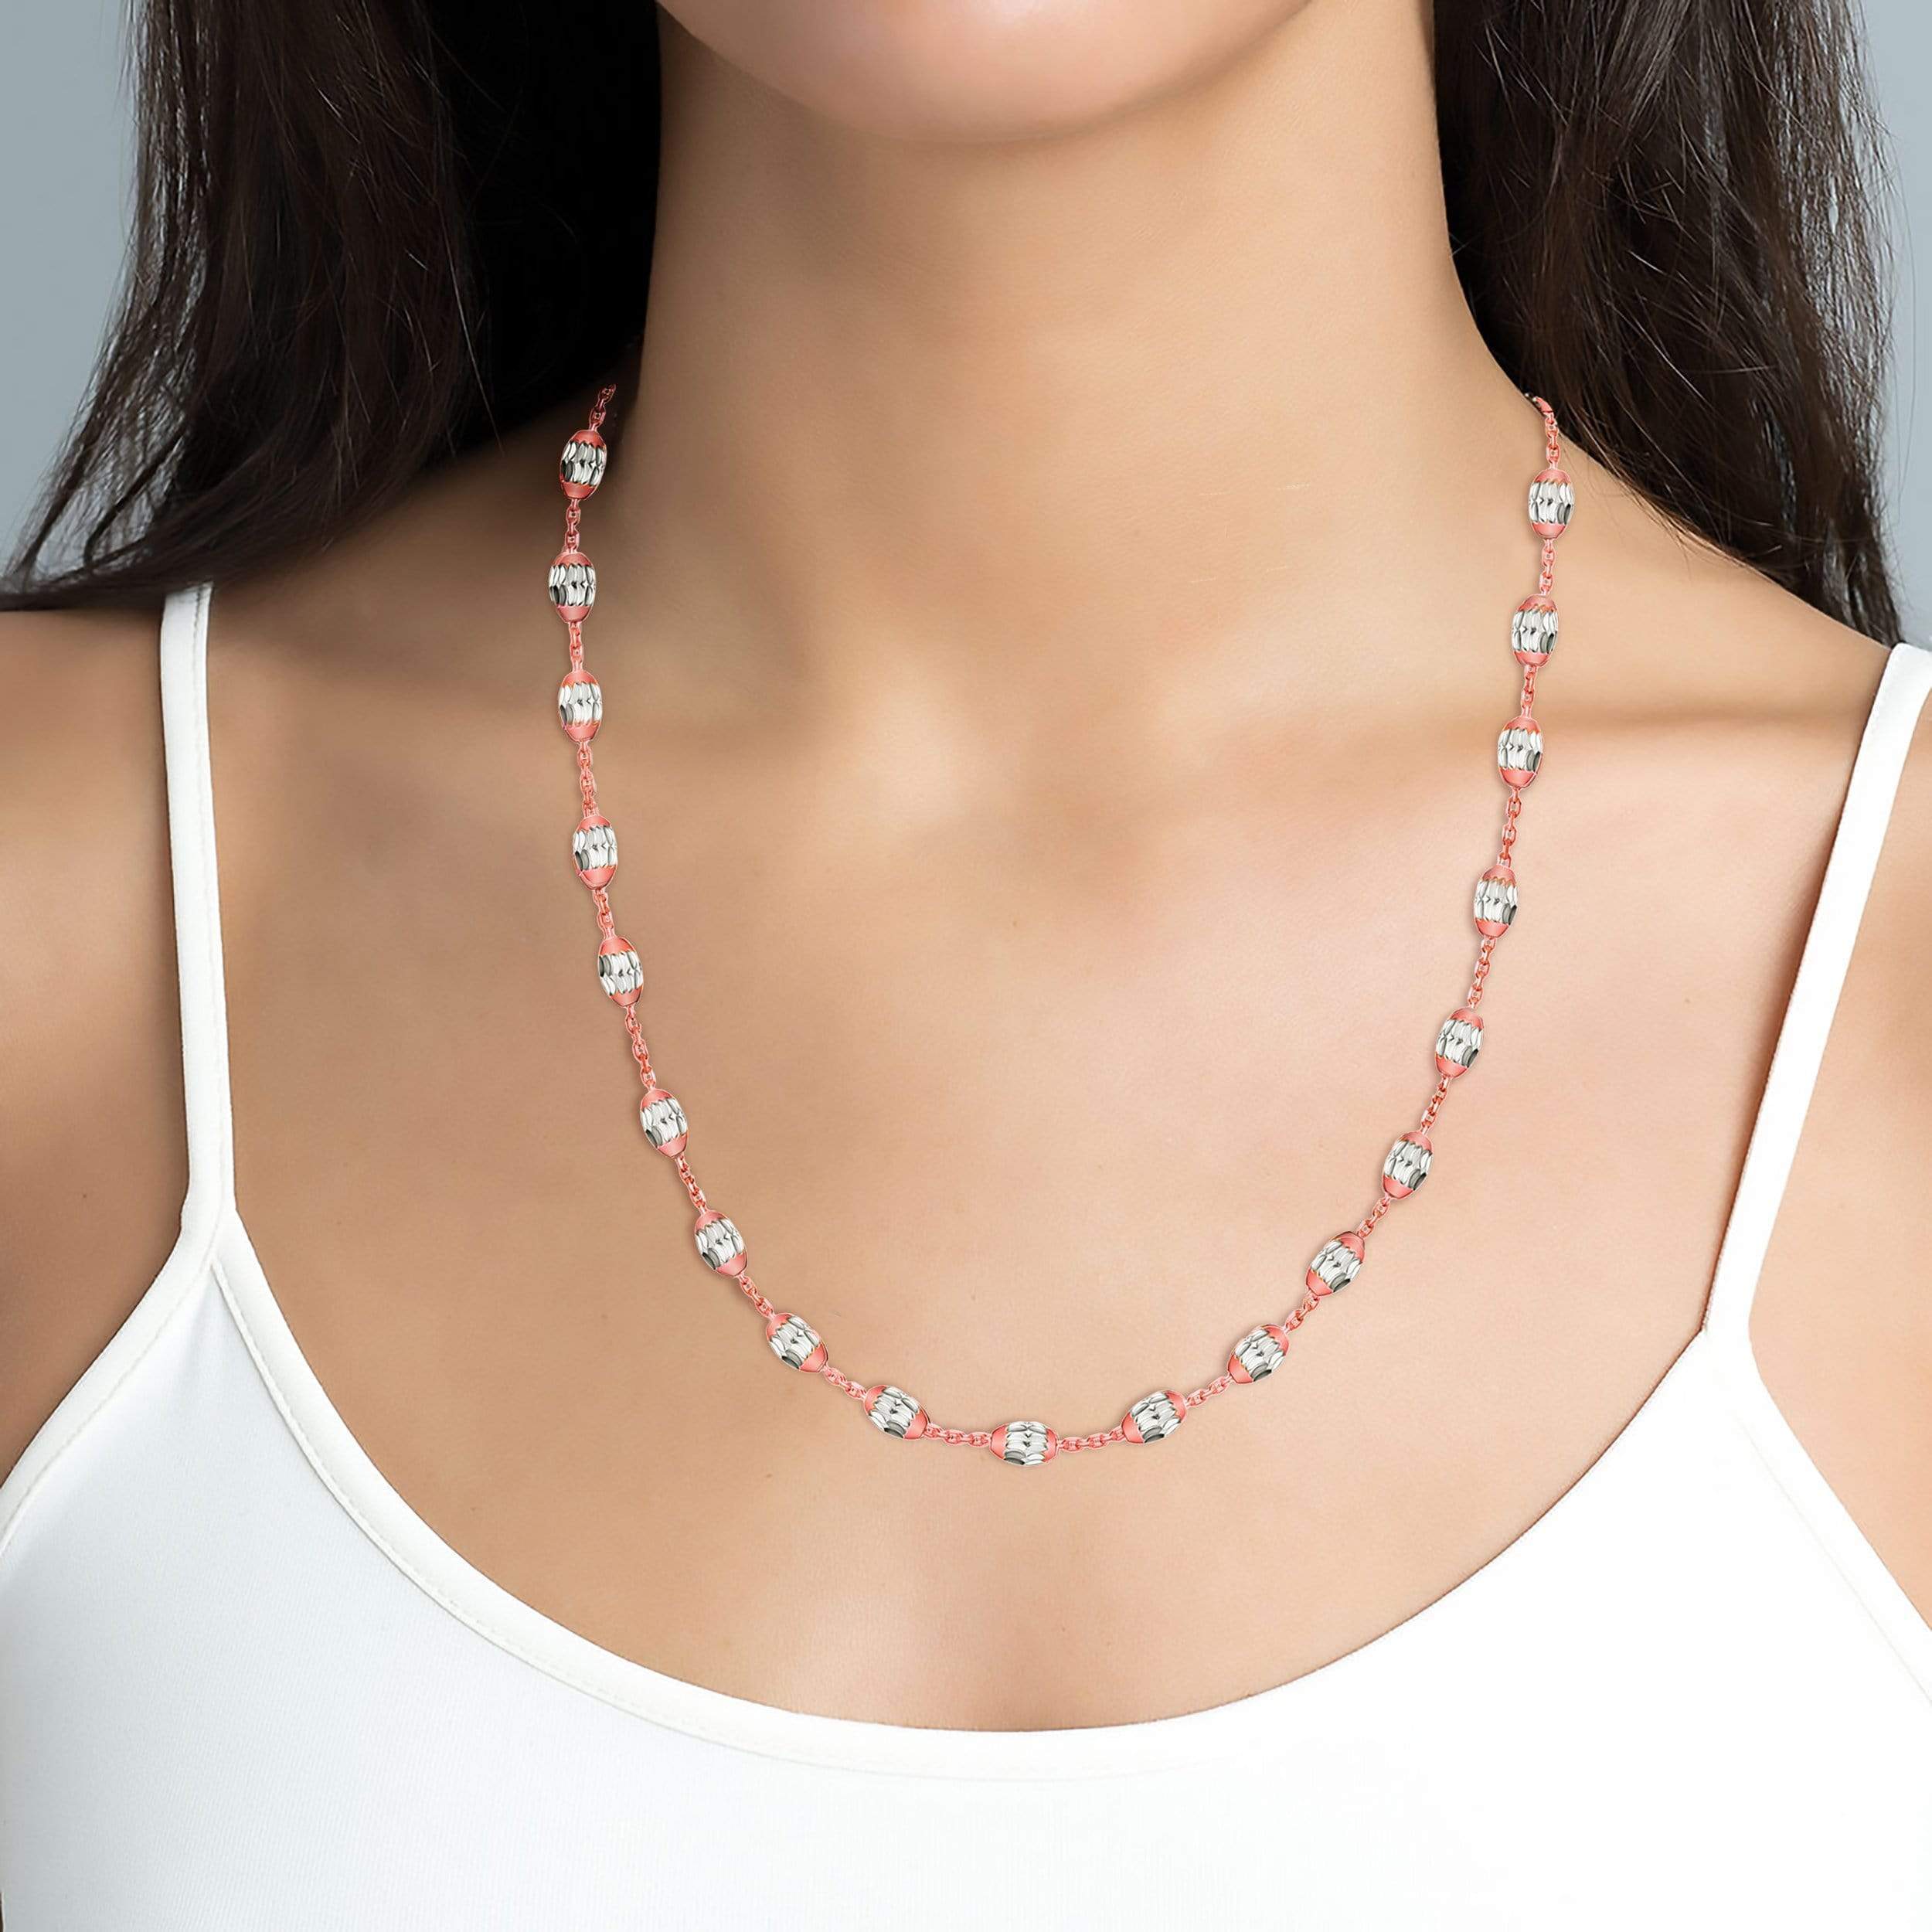 Lynora Jewellery Necklace 26" Geobeads Necklace Rose Gold Plate with Silver Beads